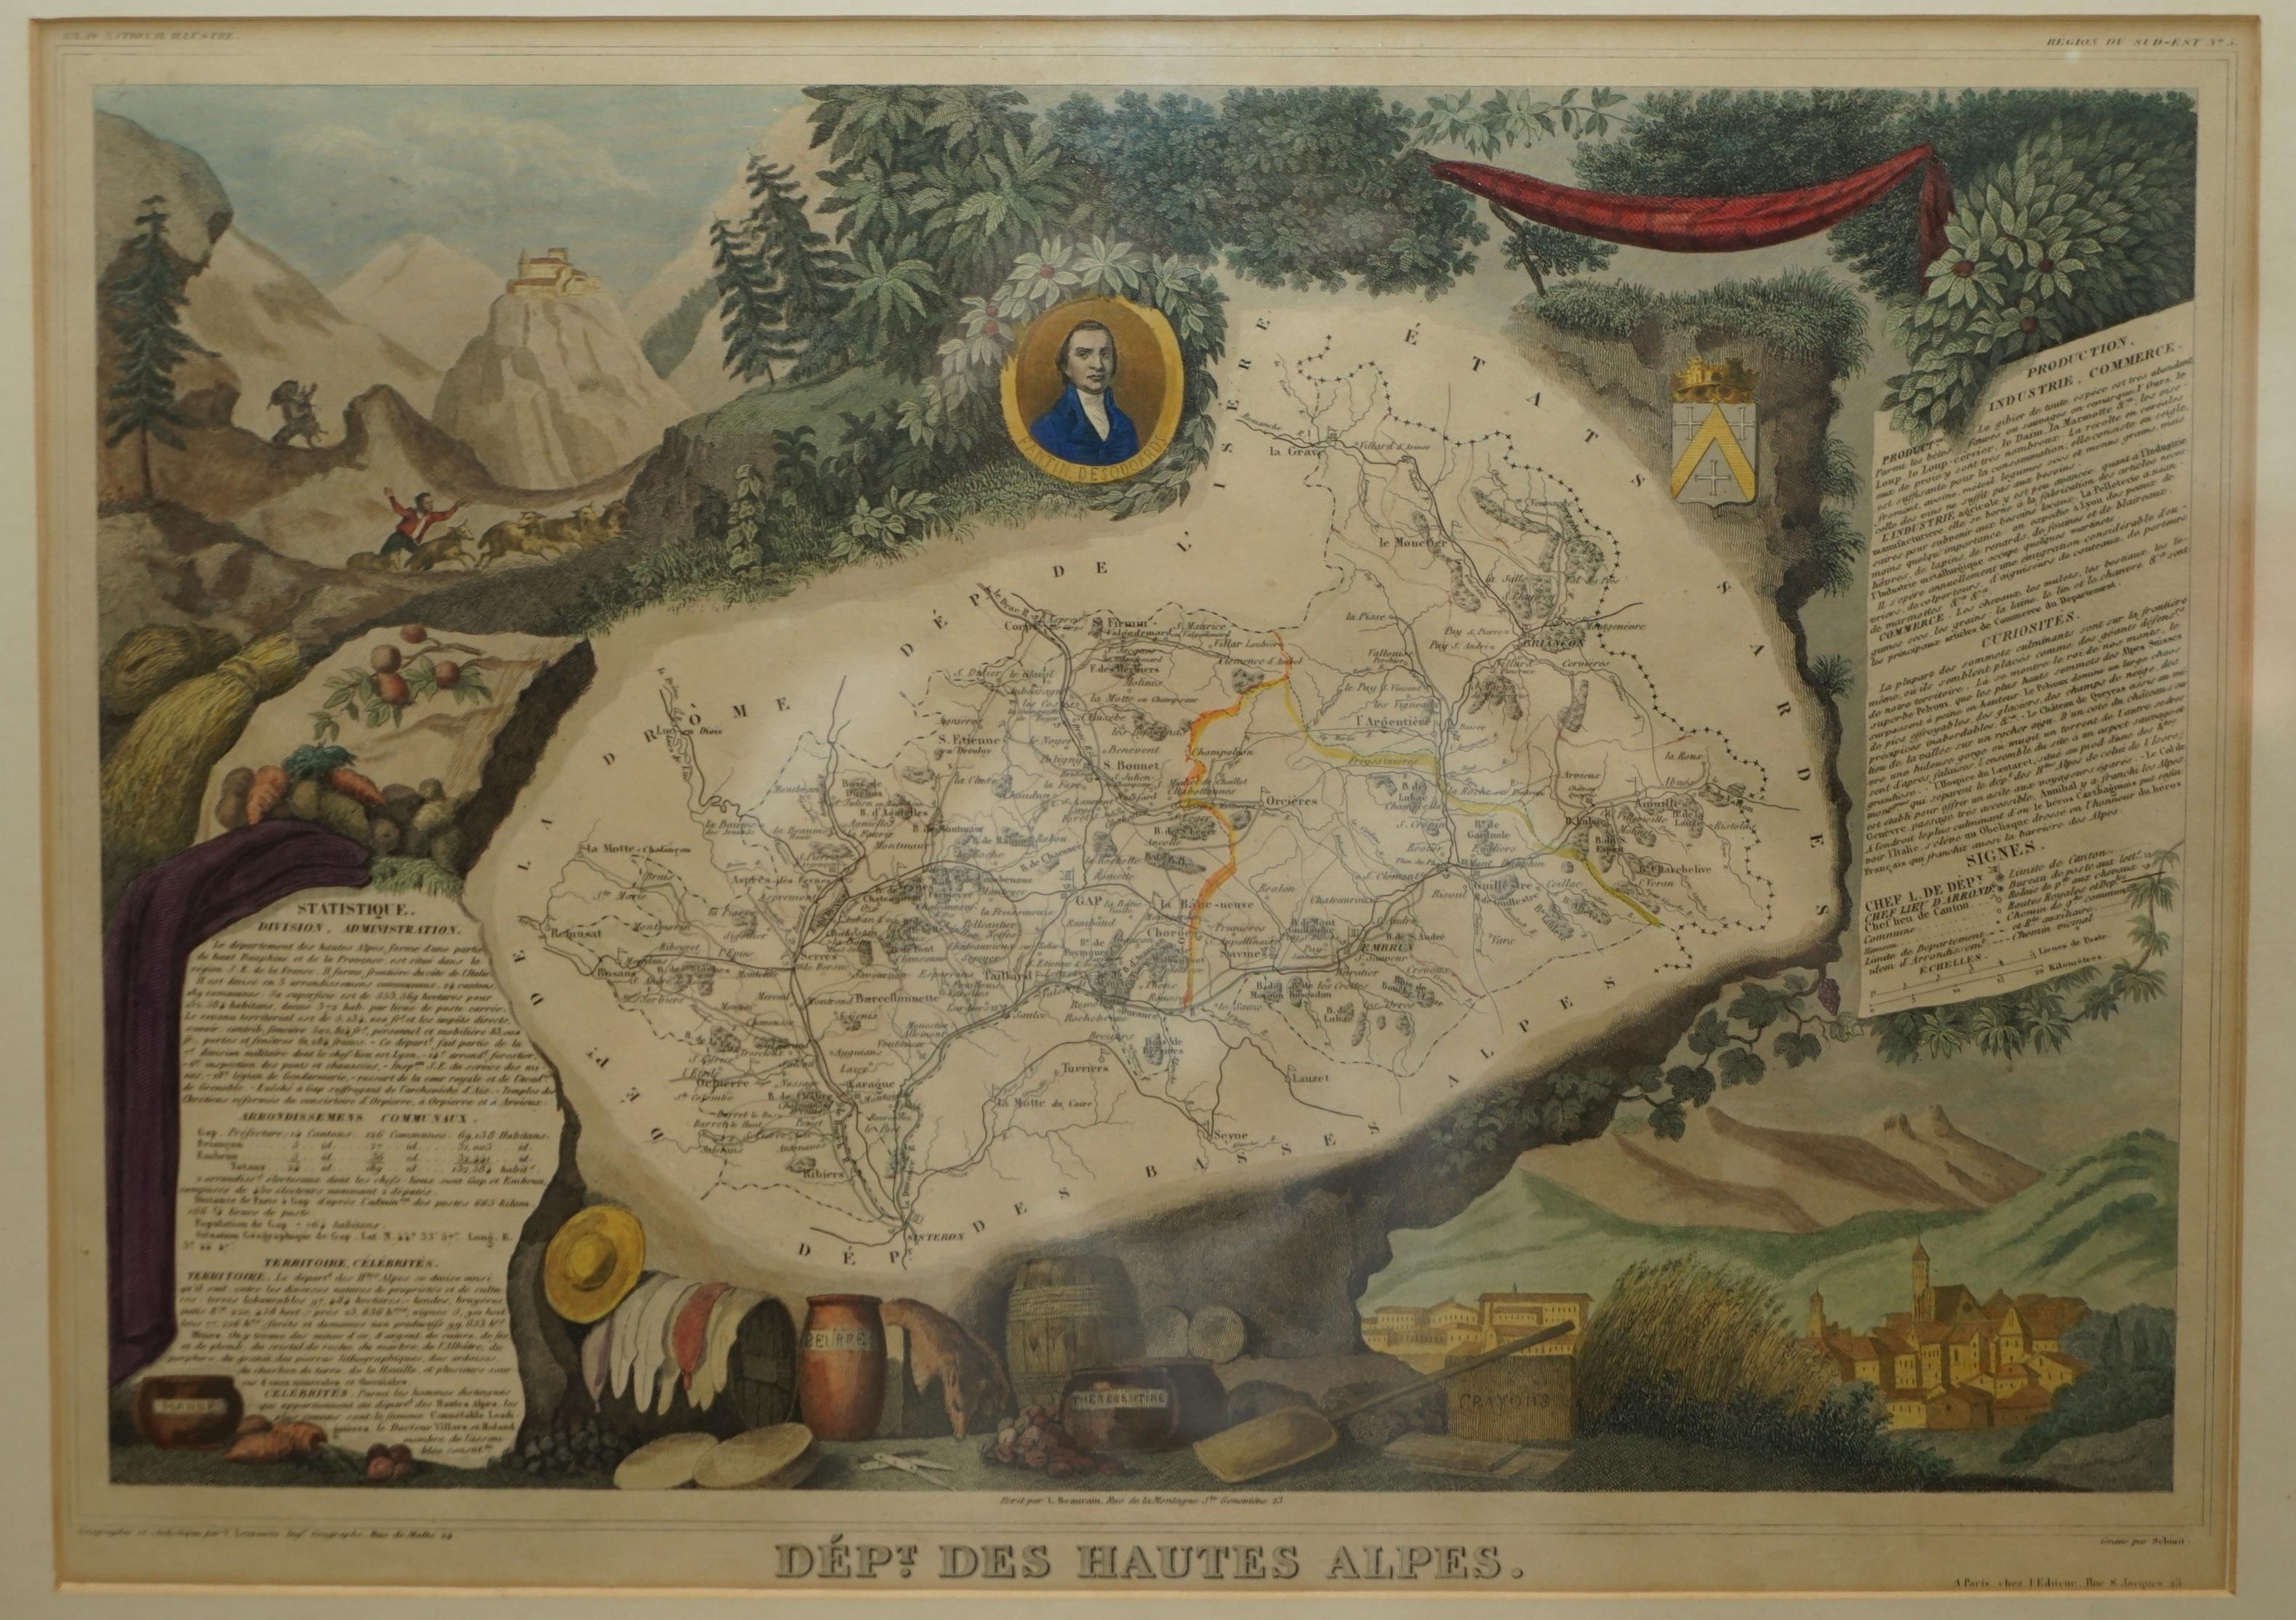 We are delighted to offer for sale this stunning 1856 hand watercolour map of the Austrian Alps titled Dept Des Hautes Alpes taken from the Atlas National Illustre y Victor Levasseur

It was published in Paris by A. Combette in 1856. This